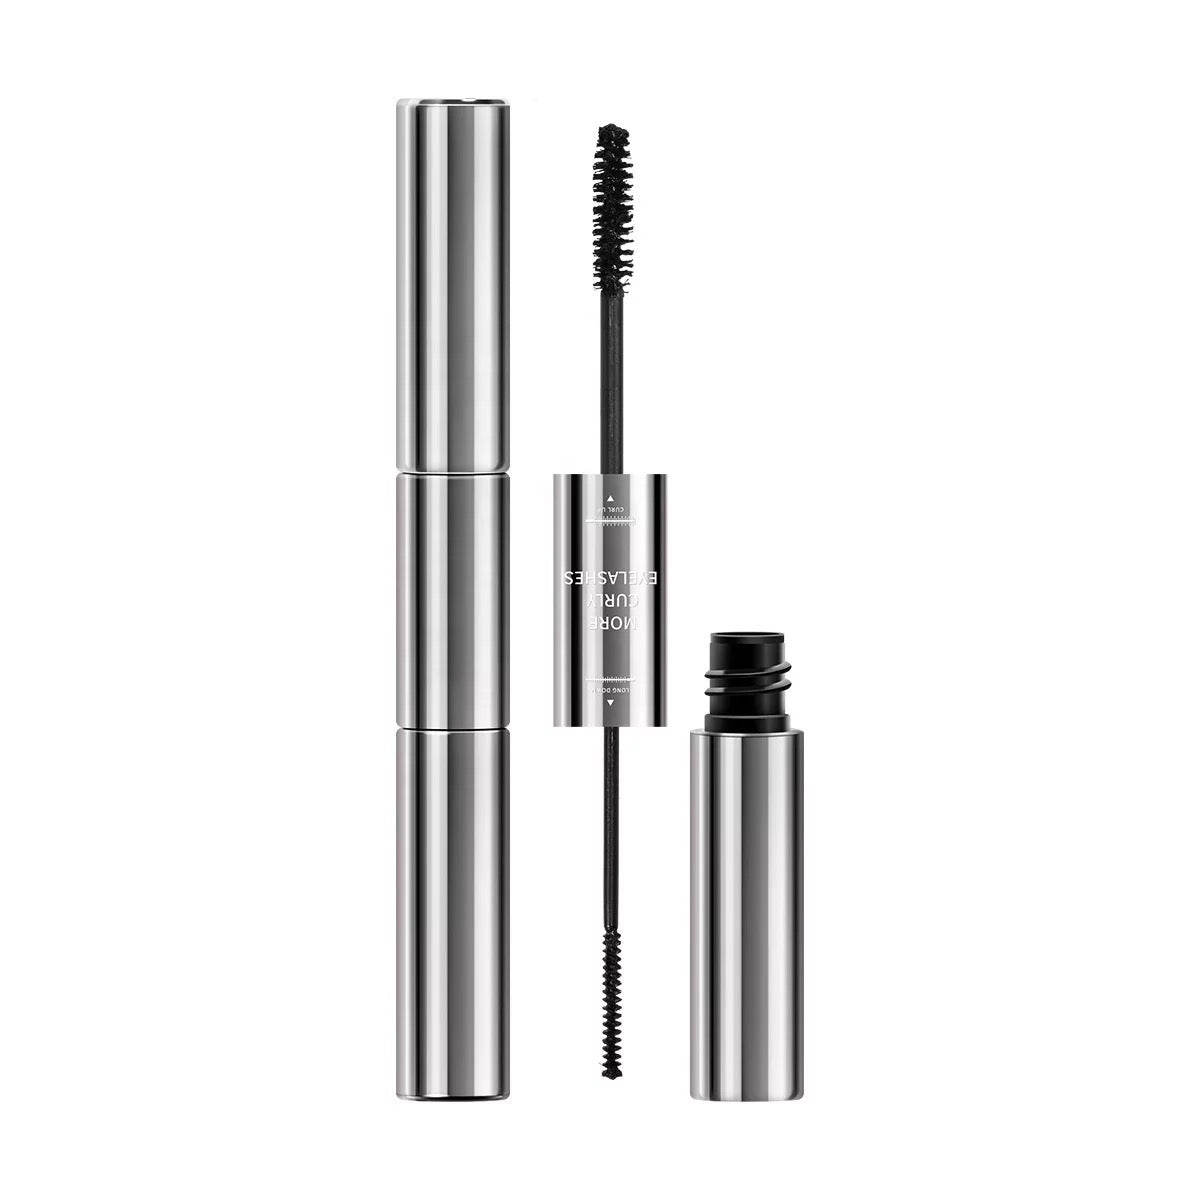 UPPER AND LOWER MASCARA